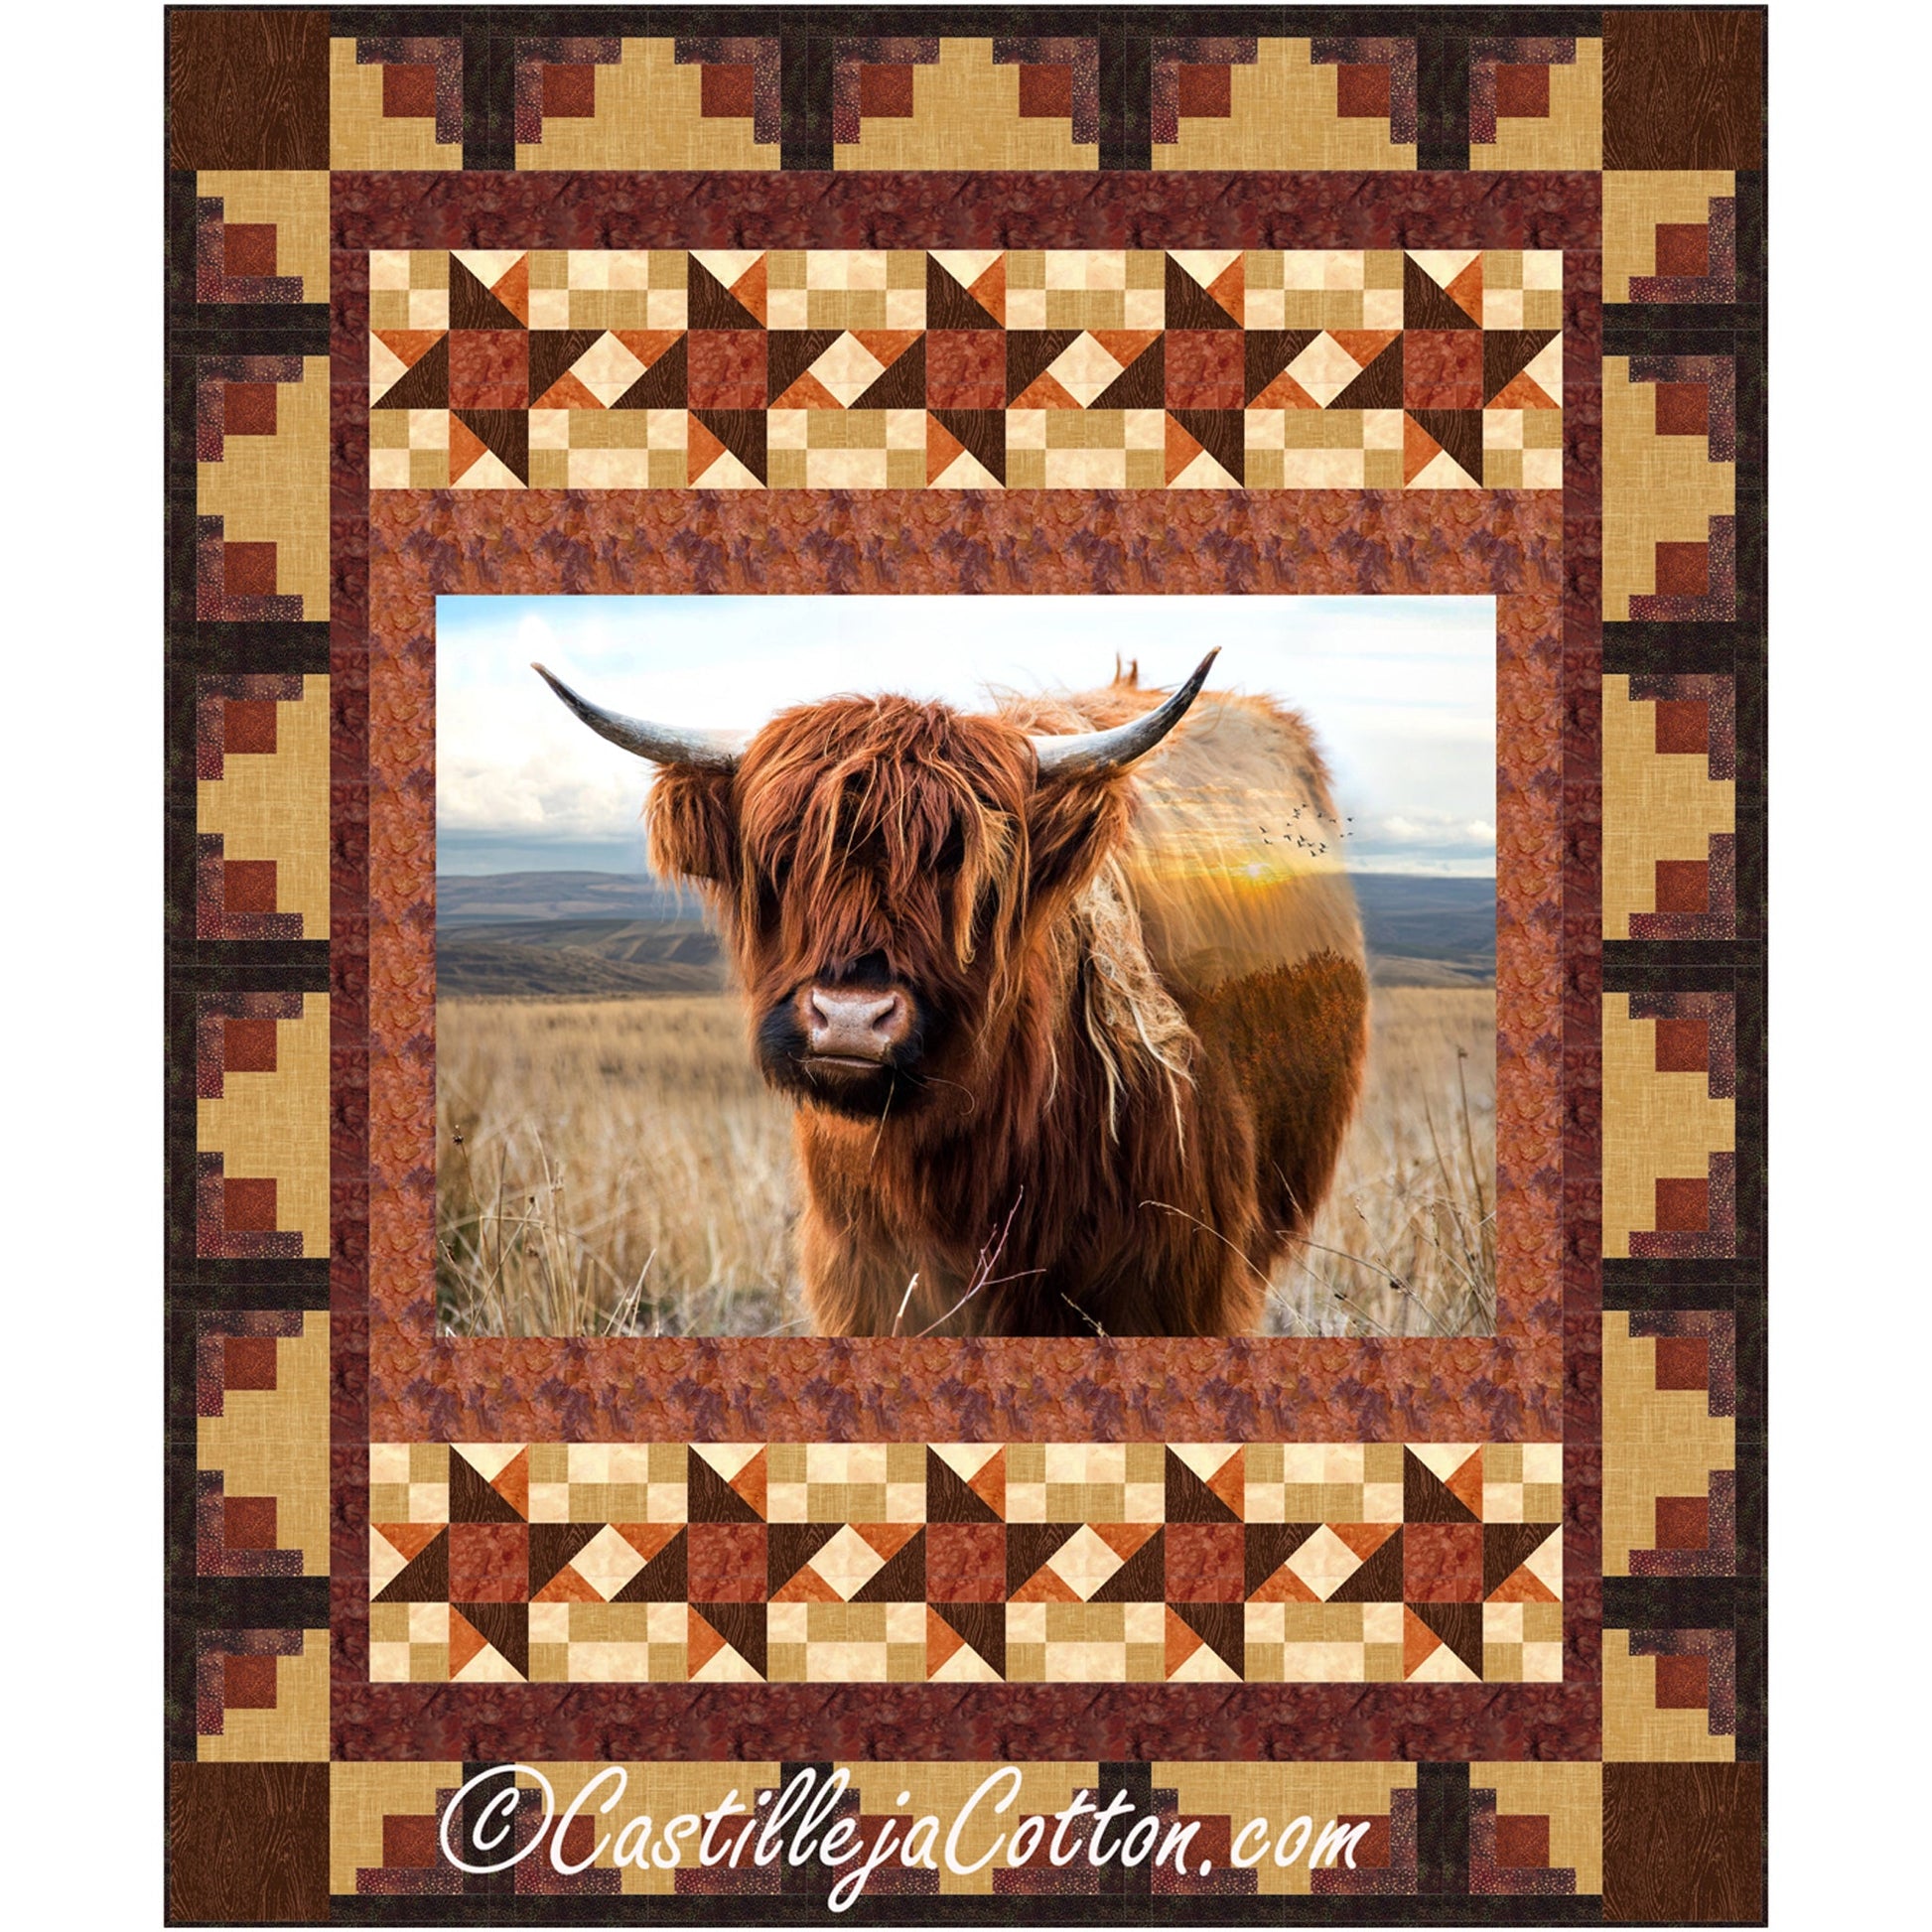 Highland cow quilt pattern: A charming design featuring the iconic Highland cow, perfect for cozying up any space.